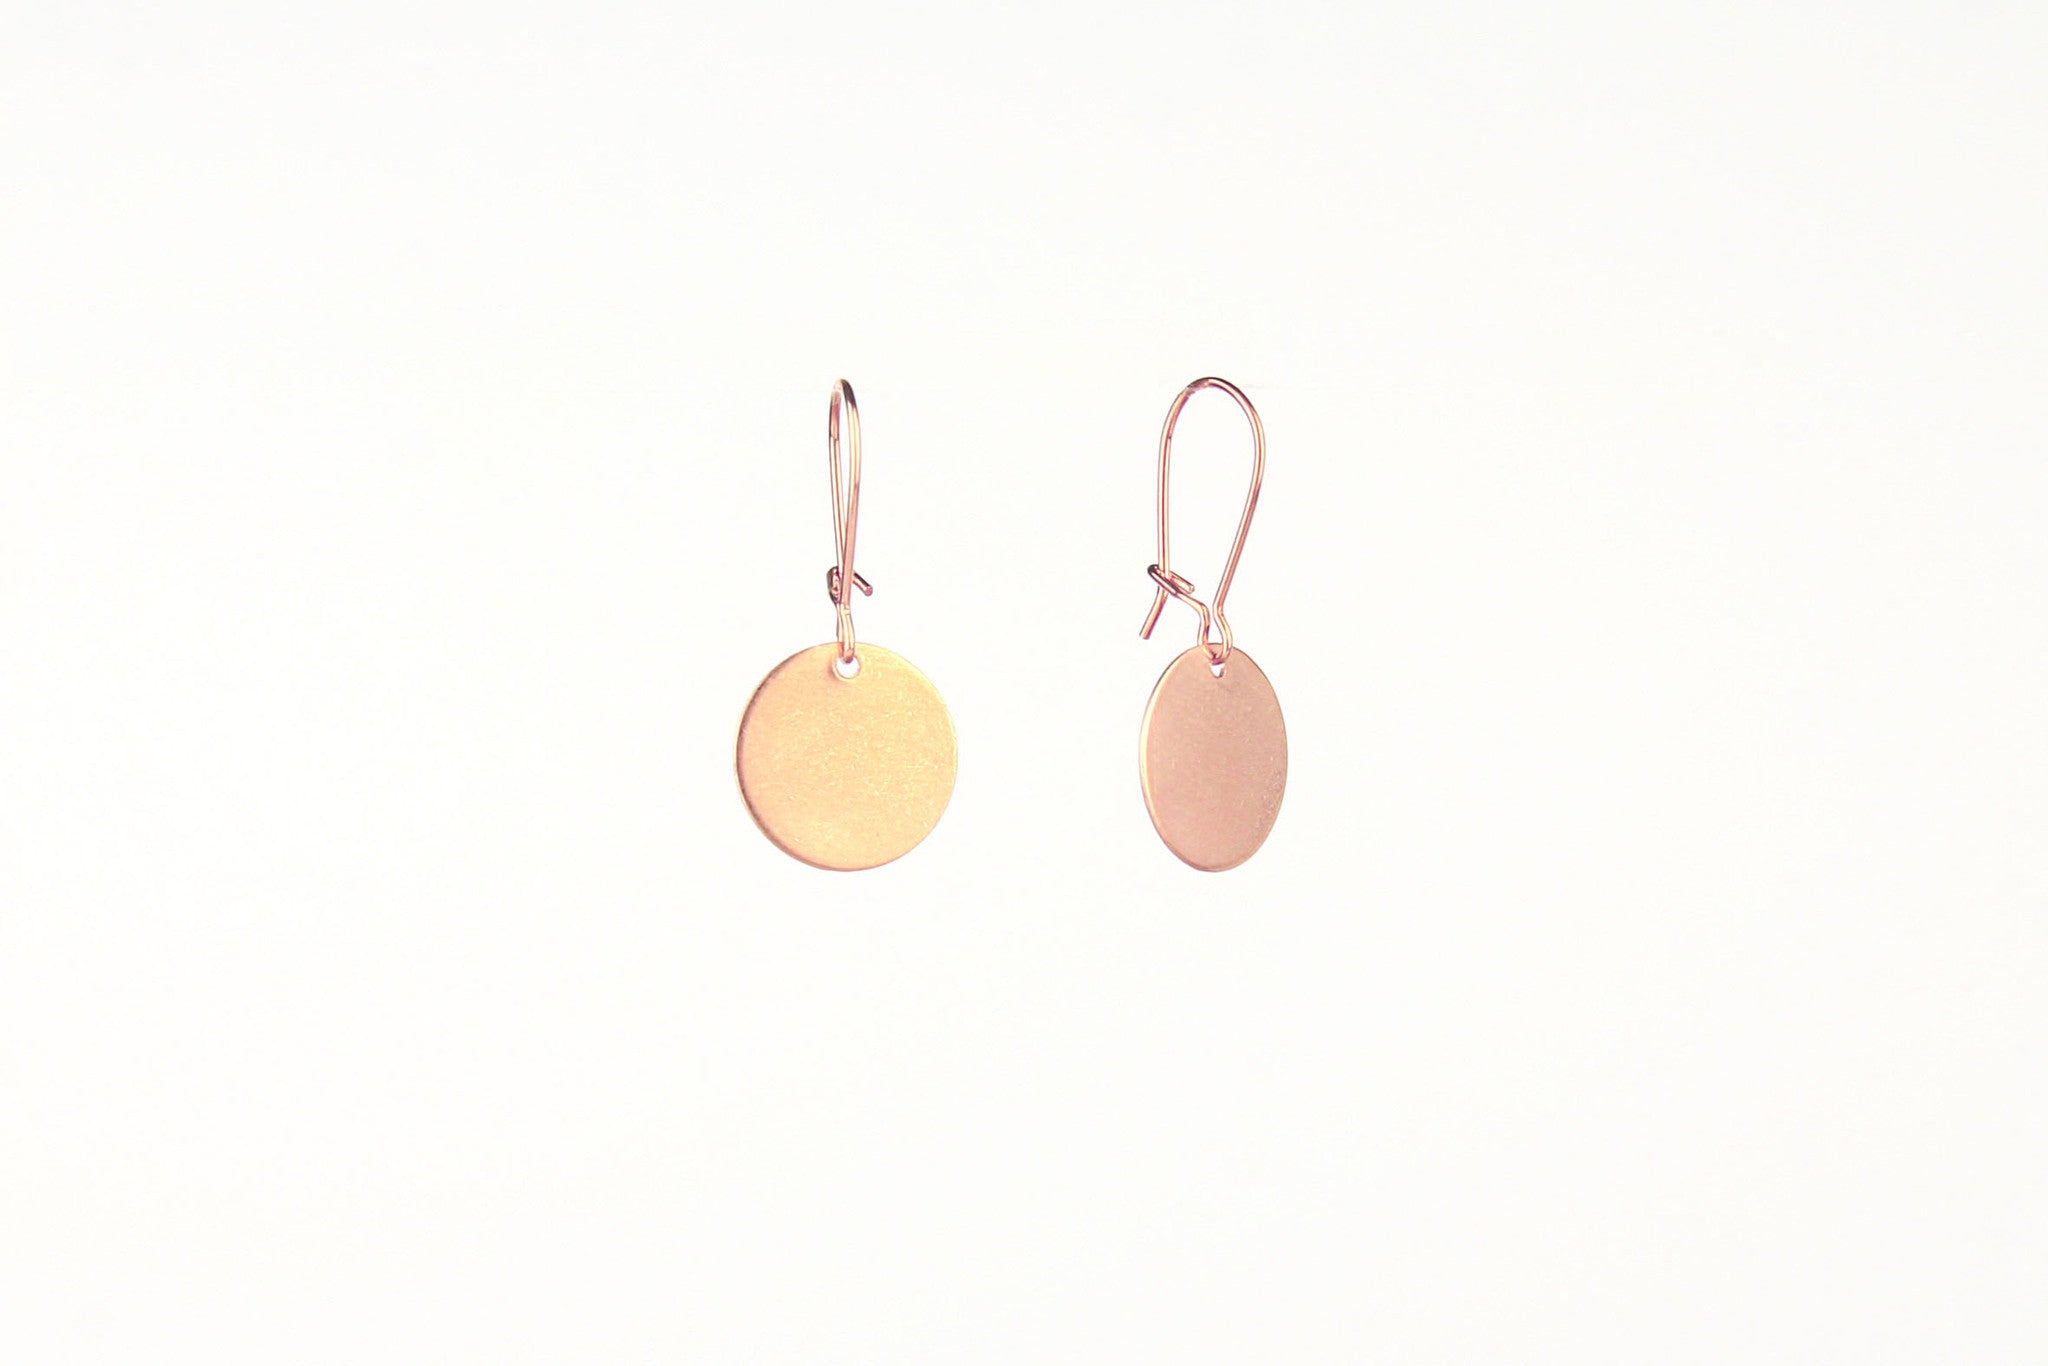 jewelberry ohrringe earrings medium disc rose gold plated sterling silver fine jewelry handmade with love fairtrade